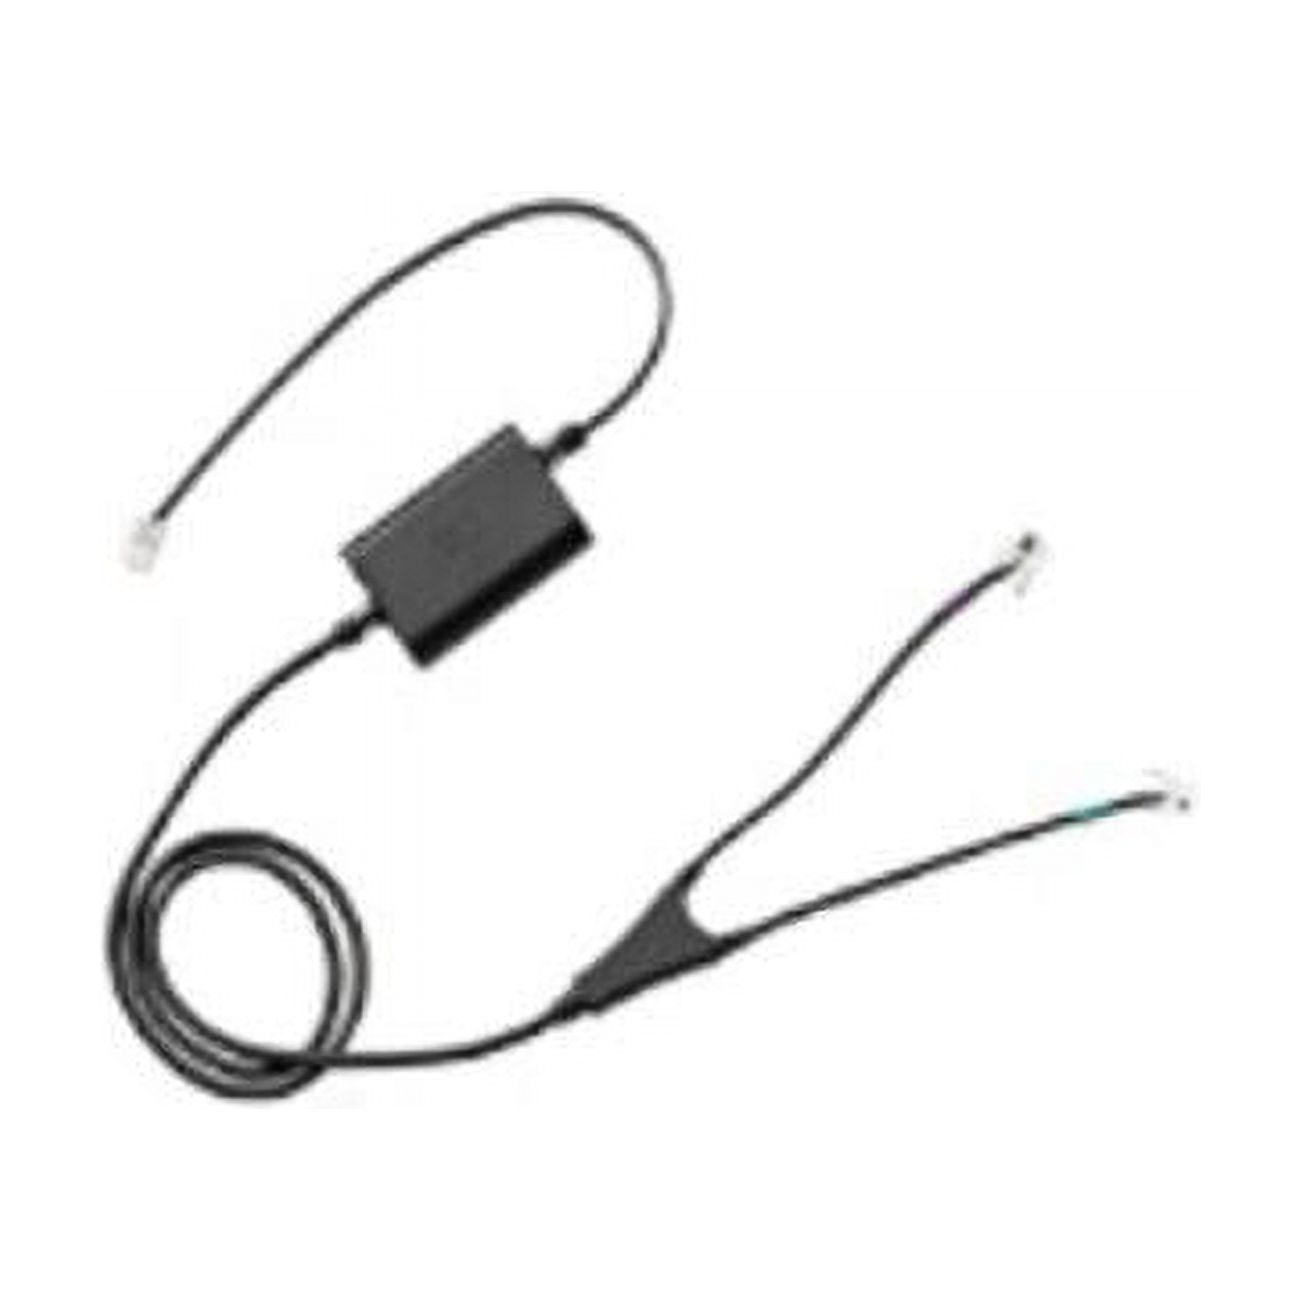 Sennheiser 1000740 9400 & 9500 Series Dect Avaya Adapter Cable for Electronic Hook Switch - image 1 of 3